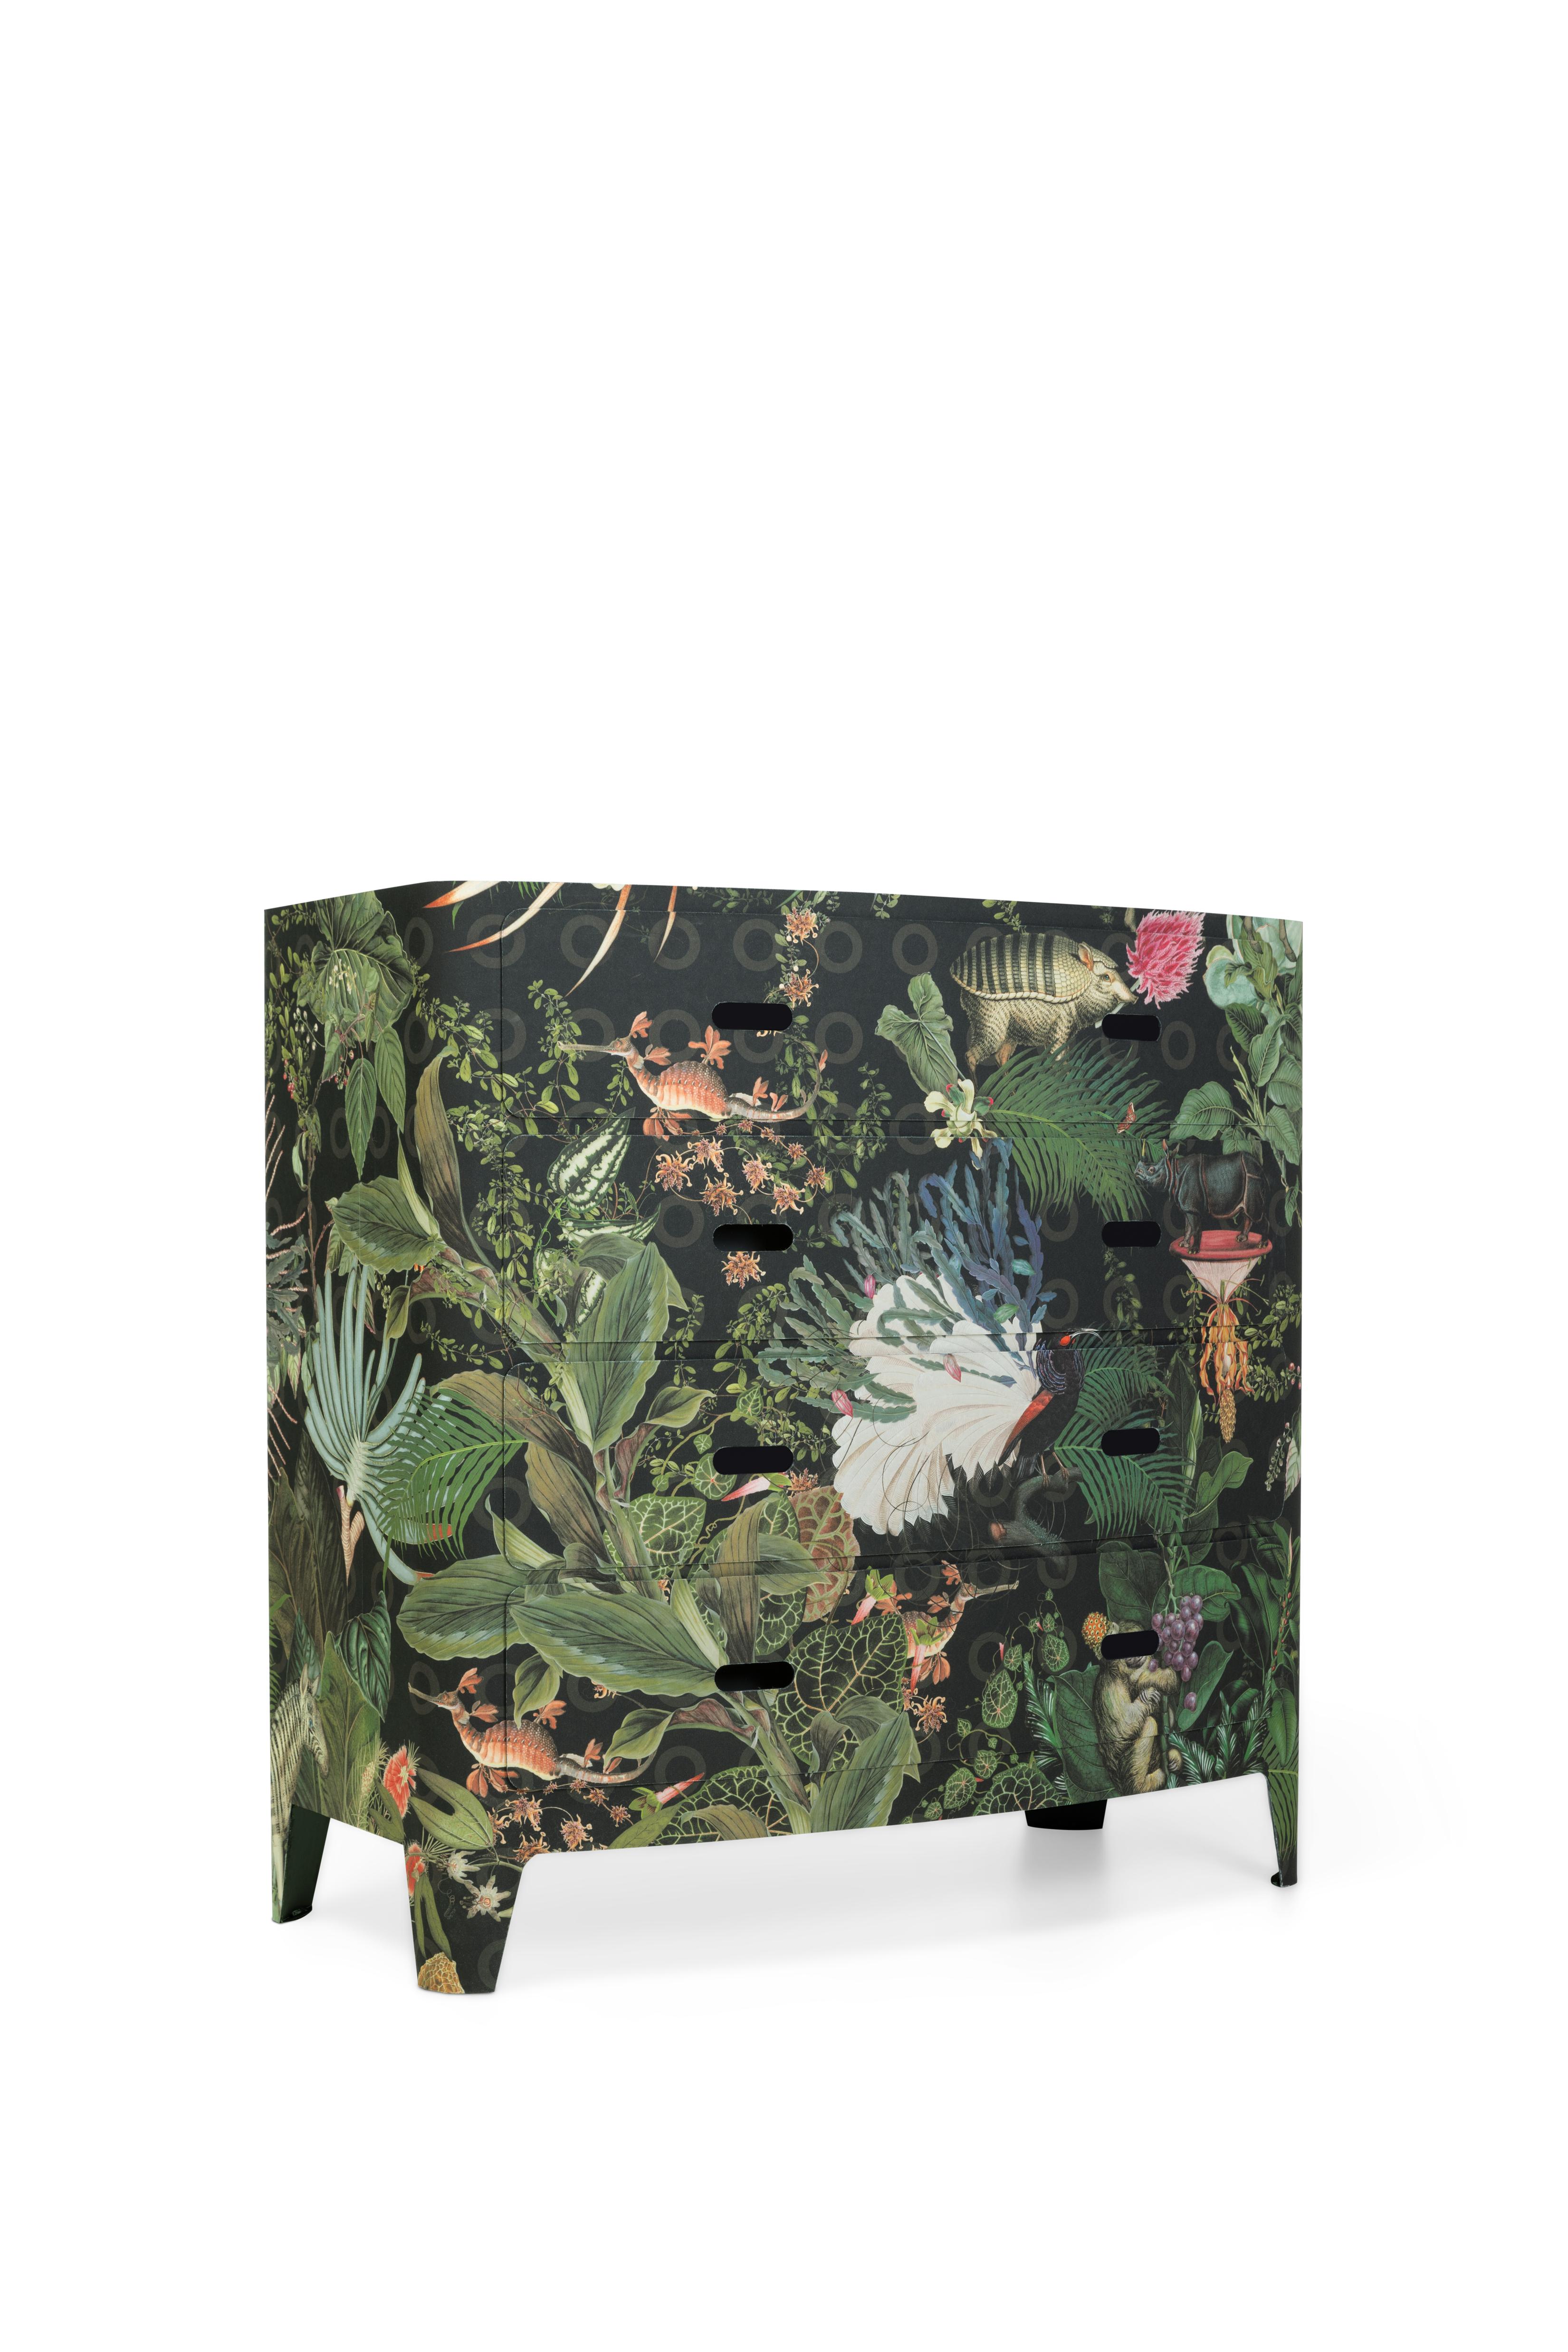 Elevate your space with the Eek Dresser - a fusion of elegance, rarity, and the humbling power of nature. This is your invitation to become part of the narrative of creative luxury.
The Eek Dresser is a captivating four-drawer dresser that